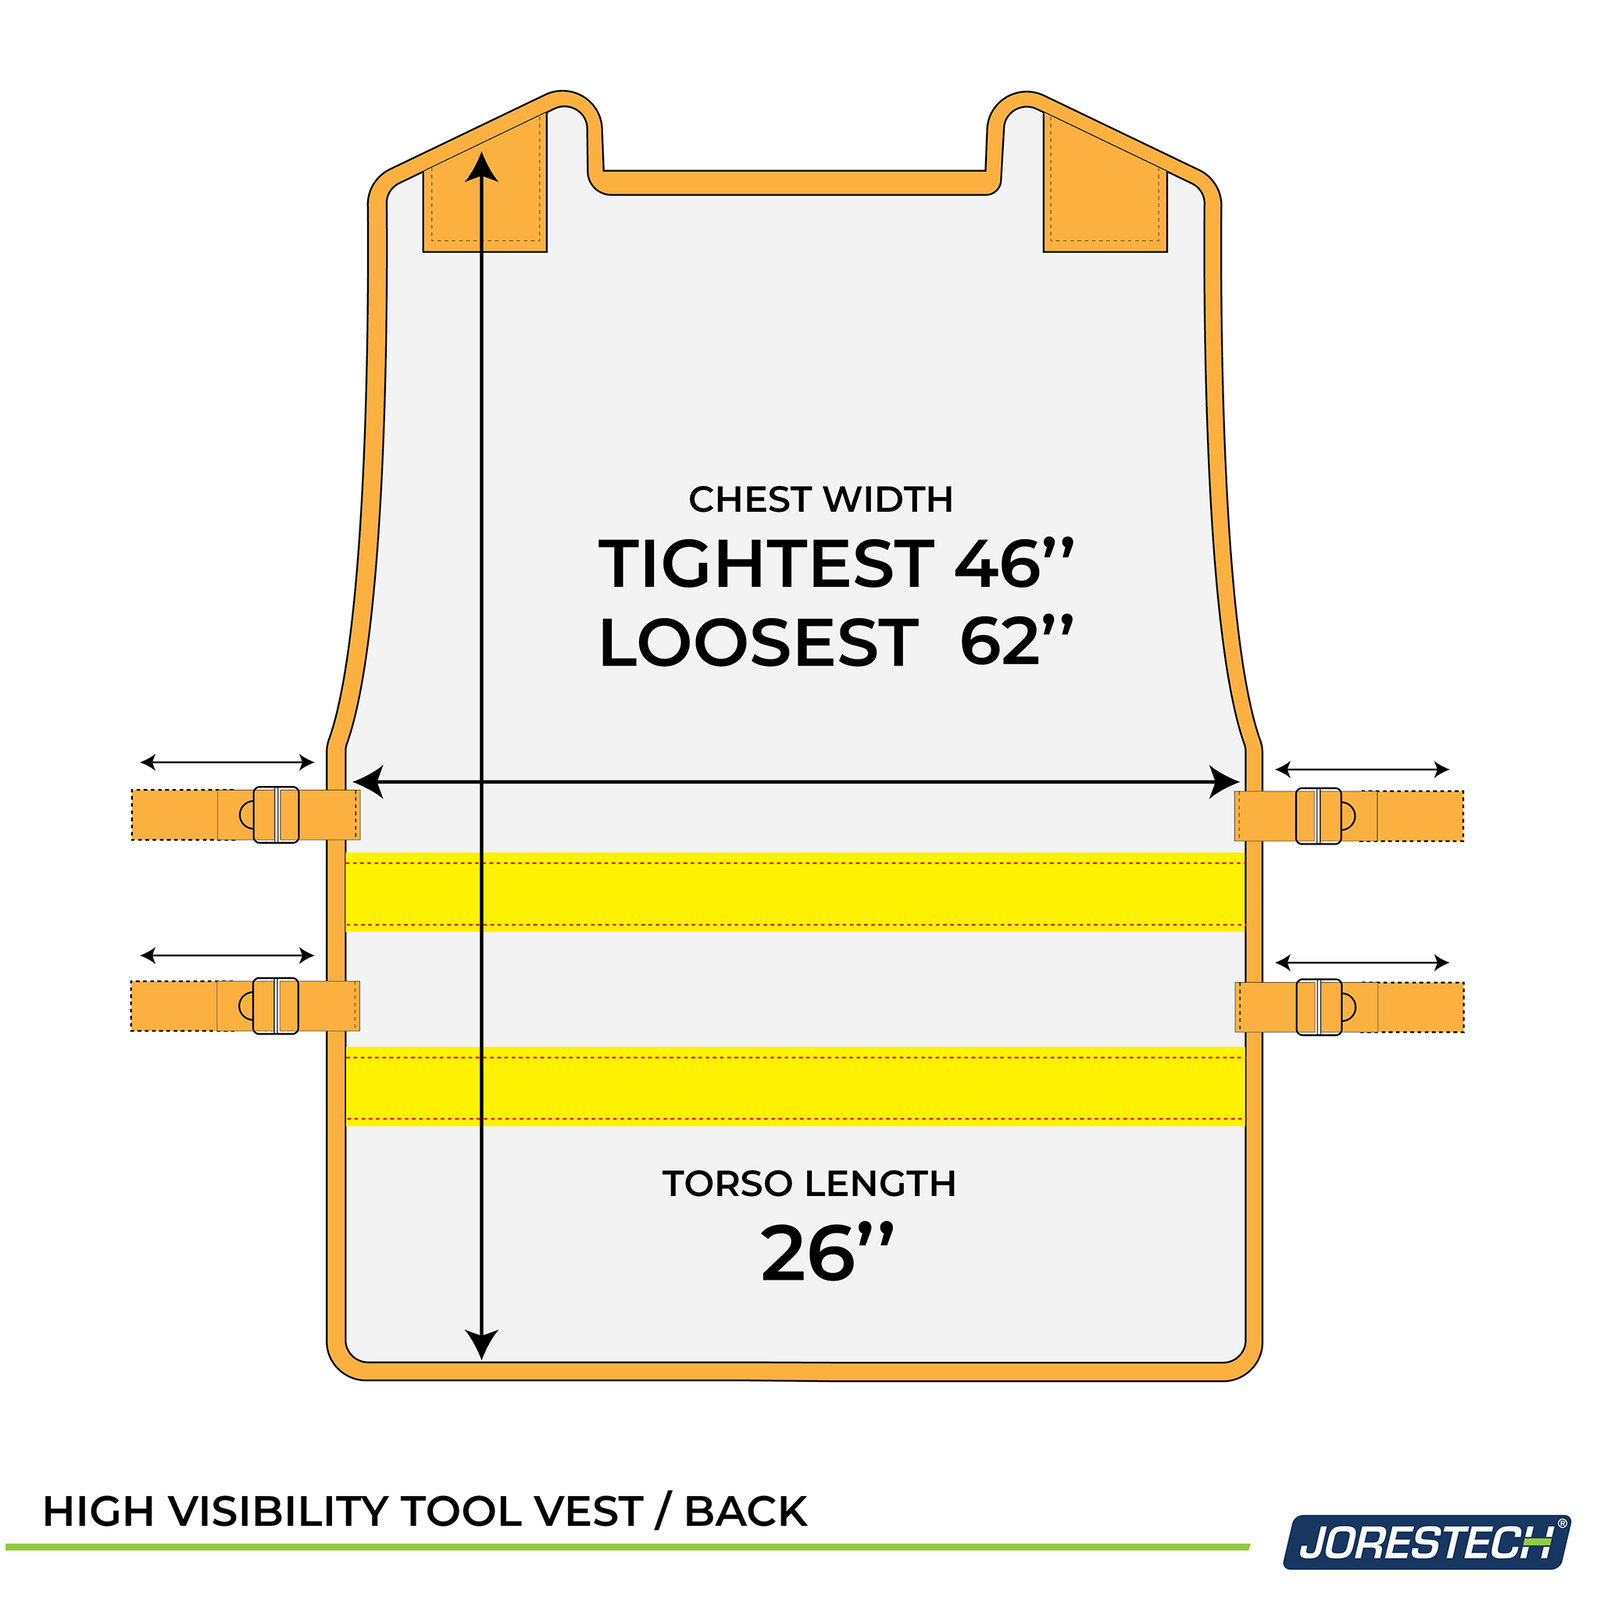 Diagram to show that chest width of the JORESTECH® tool vest can be adjusted from 46